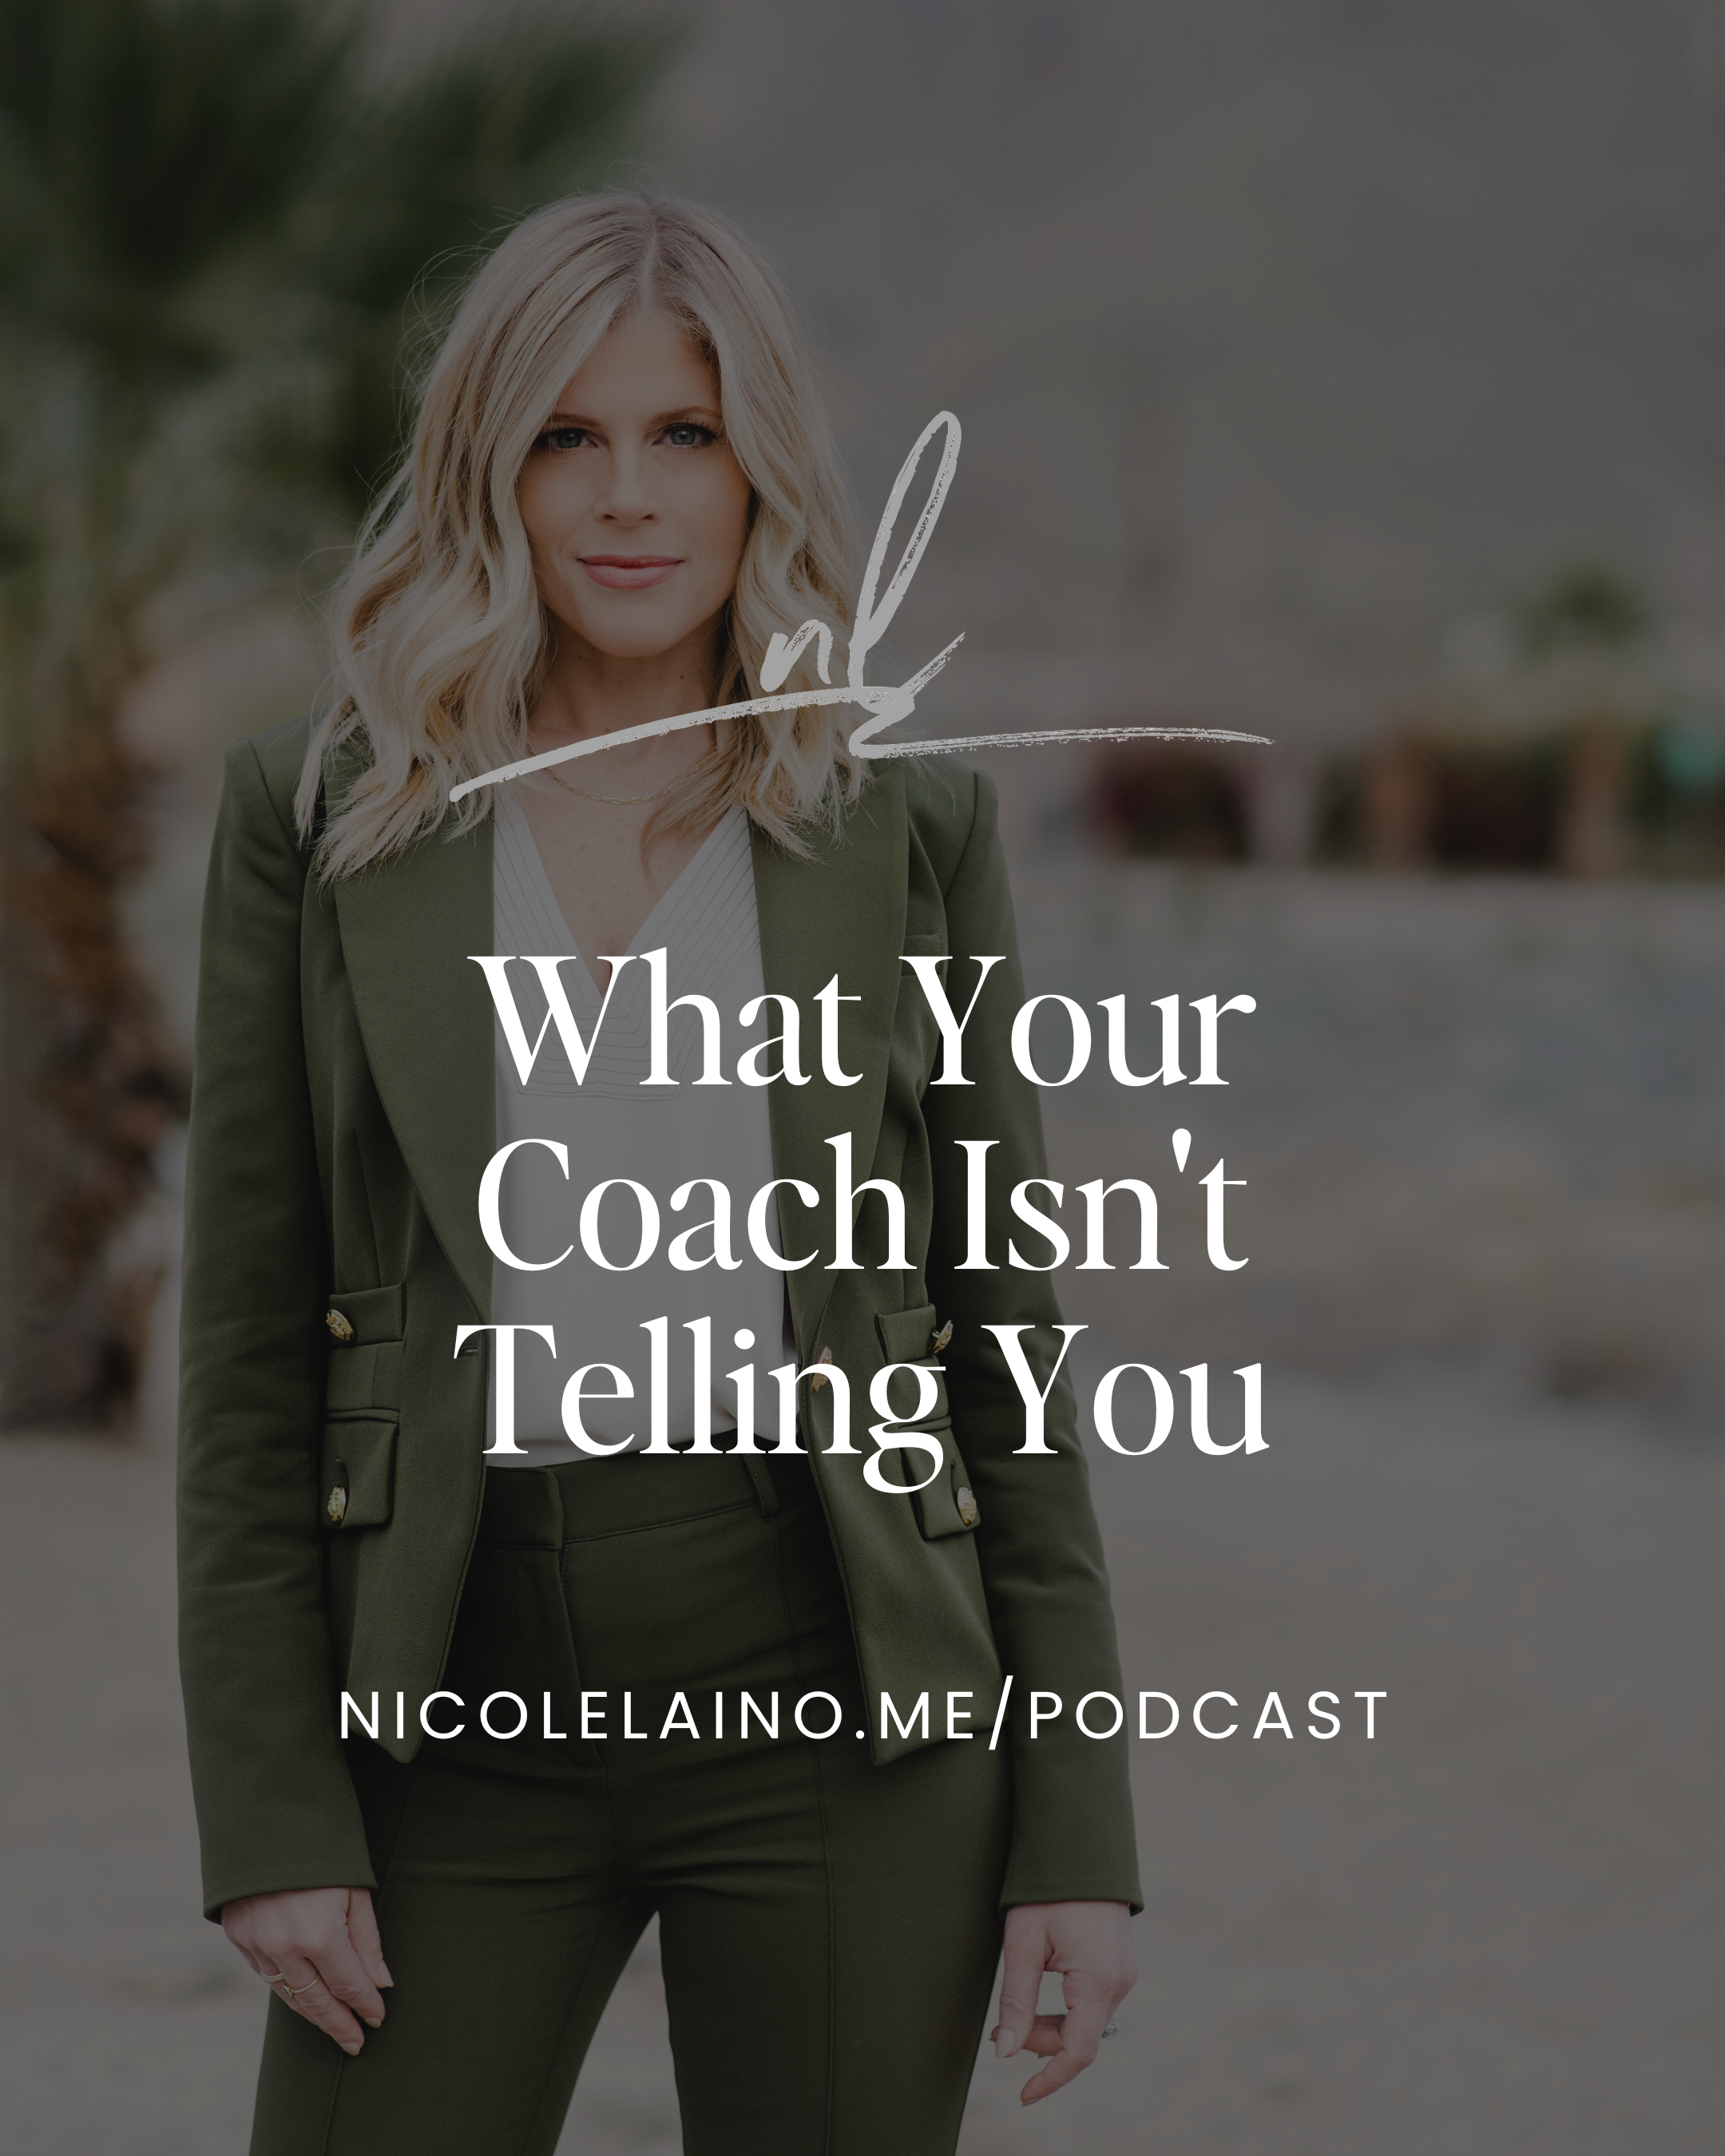 What Your Coach Isn't Telling You